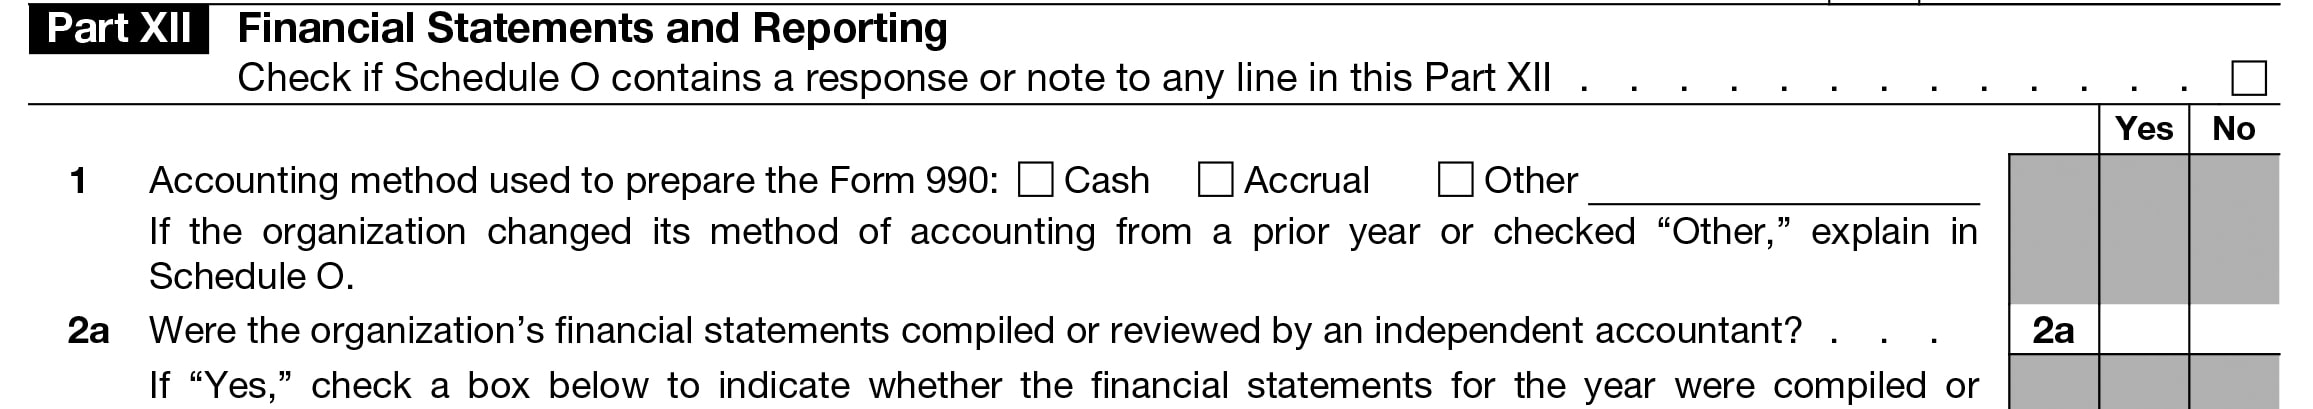 Instructions to complete Form 990 Part XII - Financial Statements and Reporting